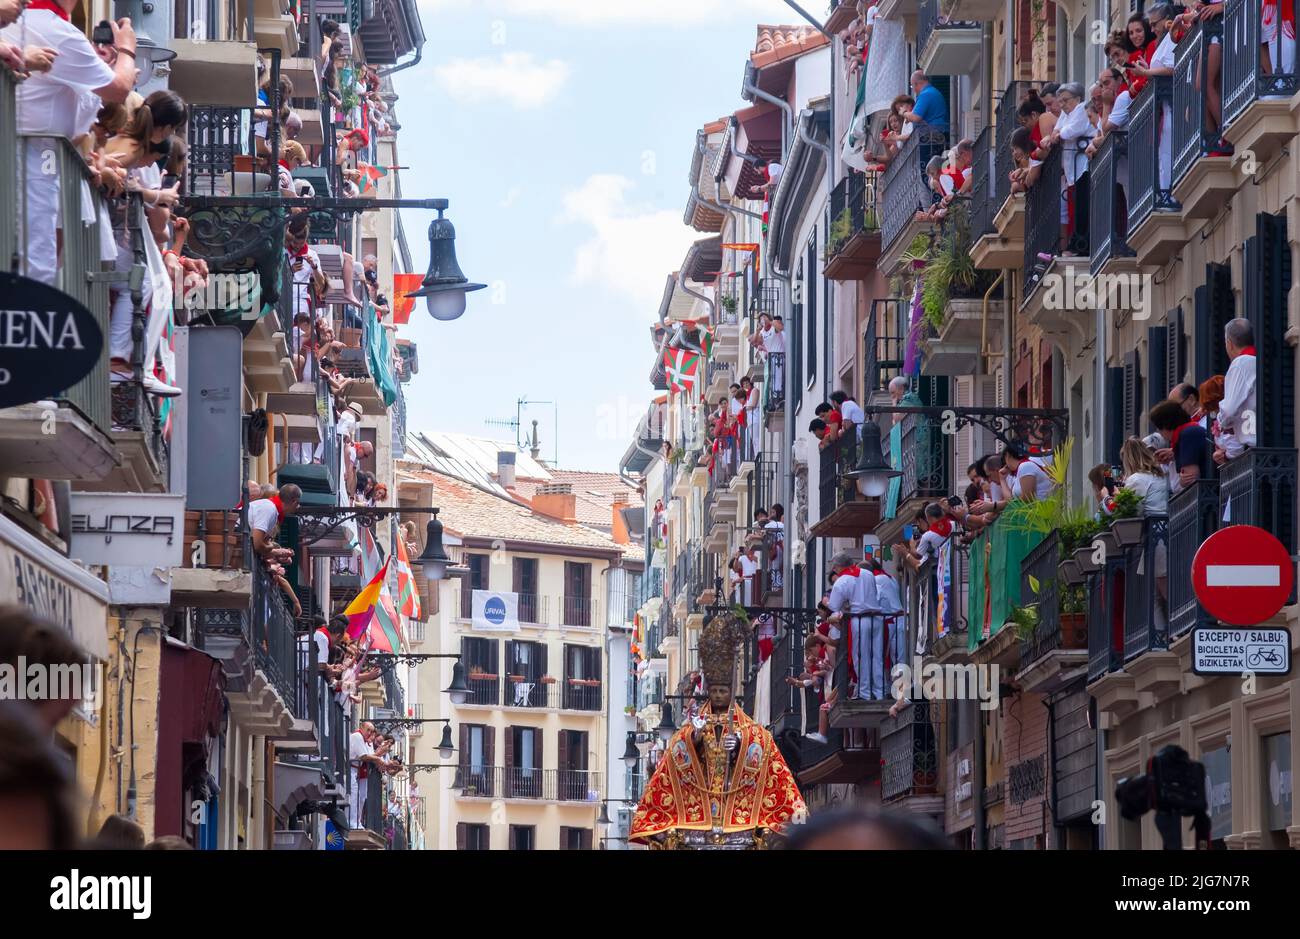 Image of San Fermin in the traditional procession of the saint and people on the balconies in the main street. July 07, 2022. Pamplona, Navarra, Spa Stock Photo